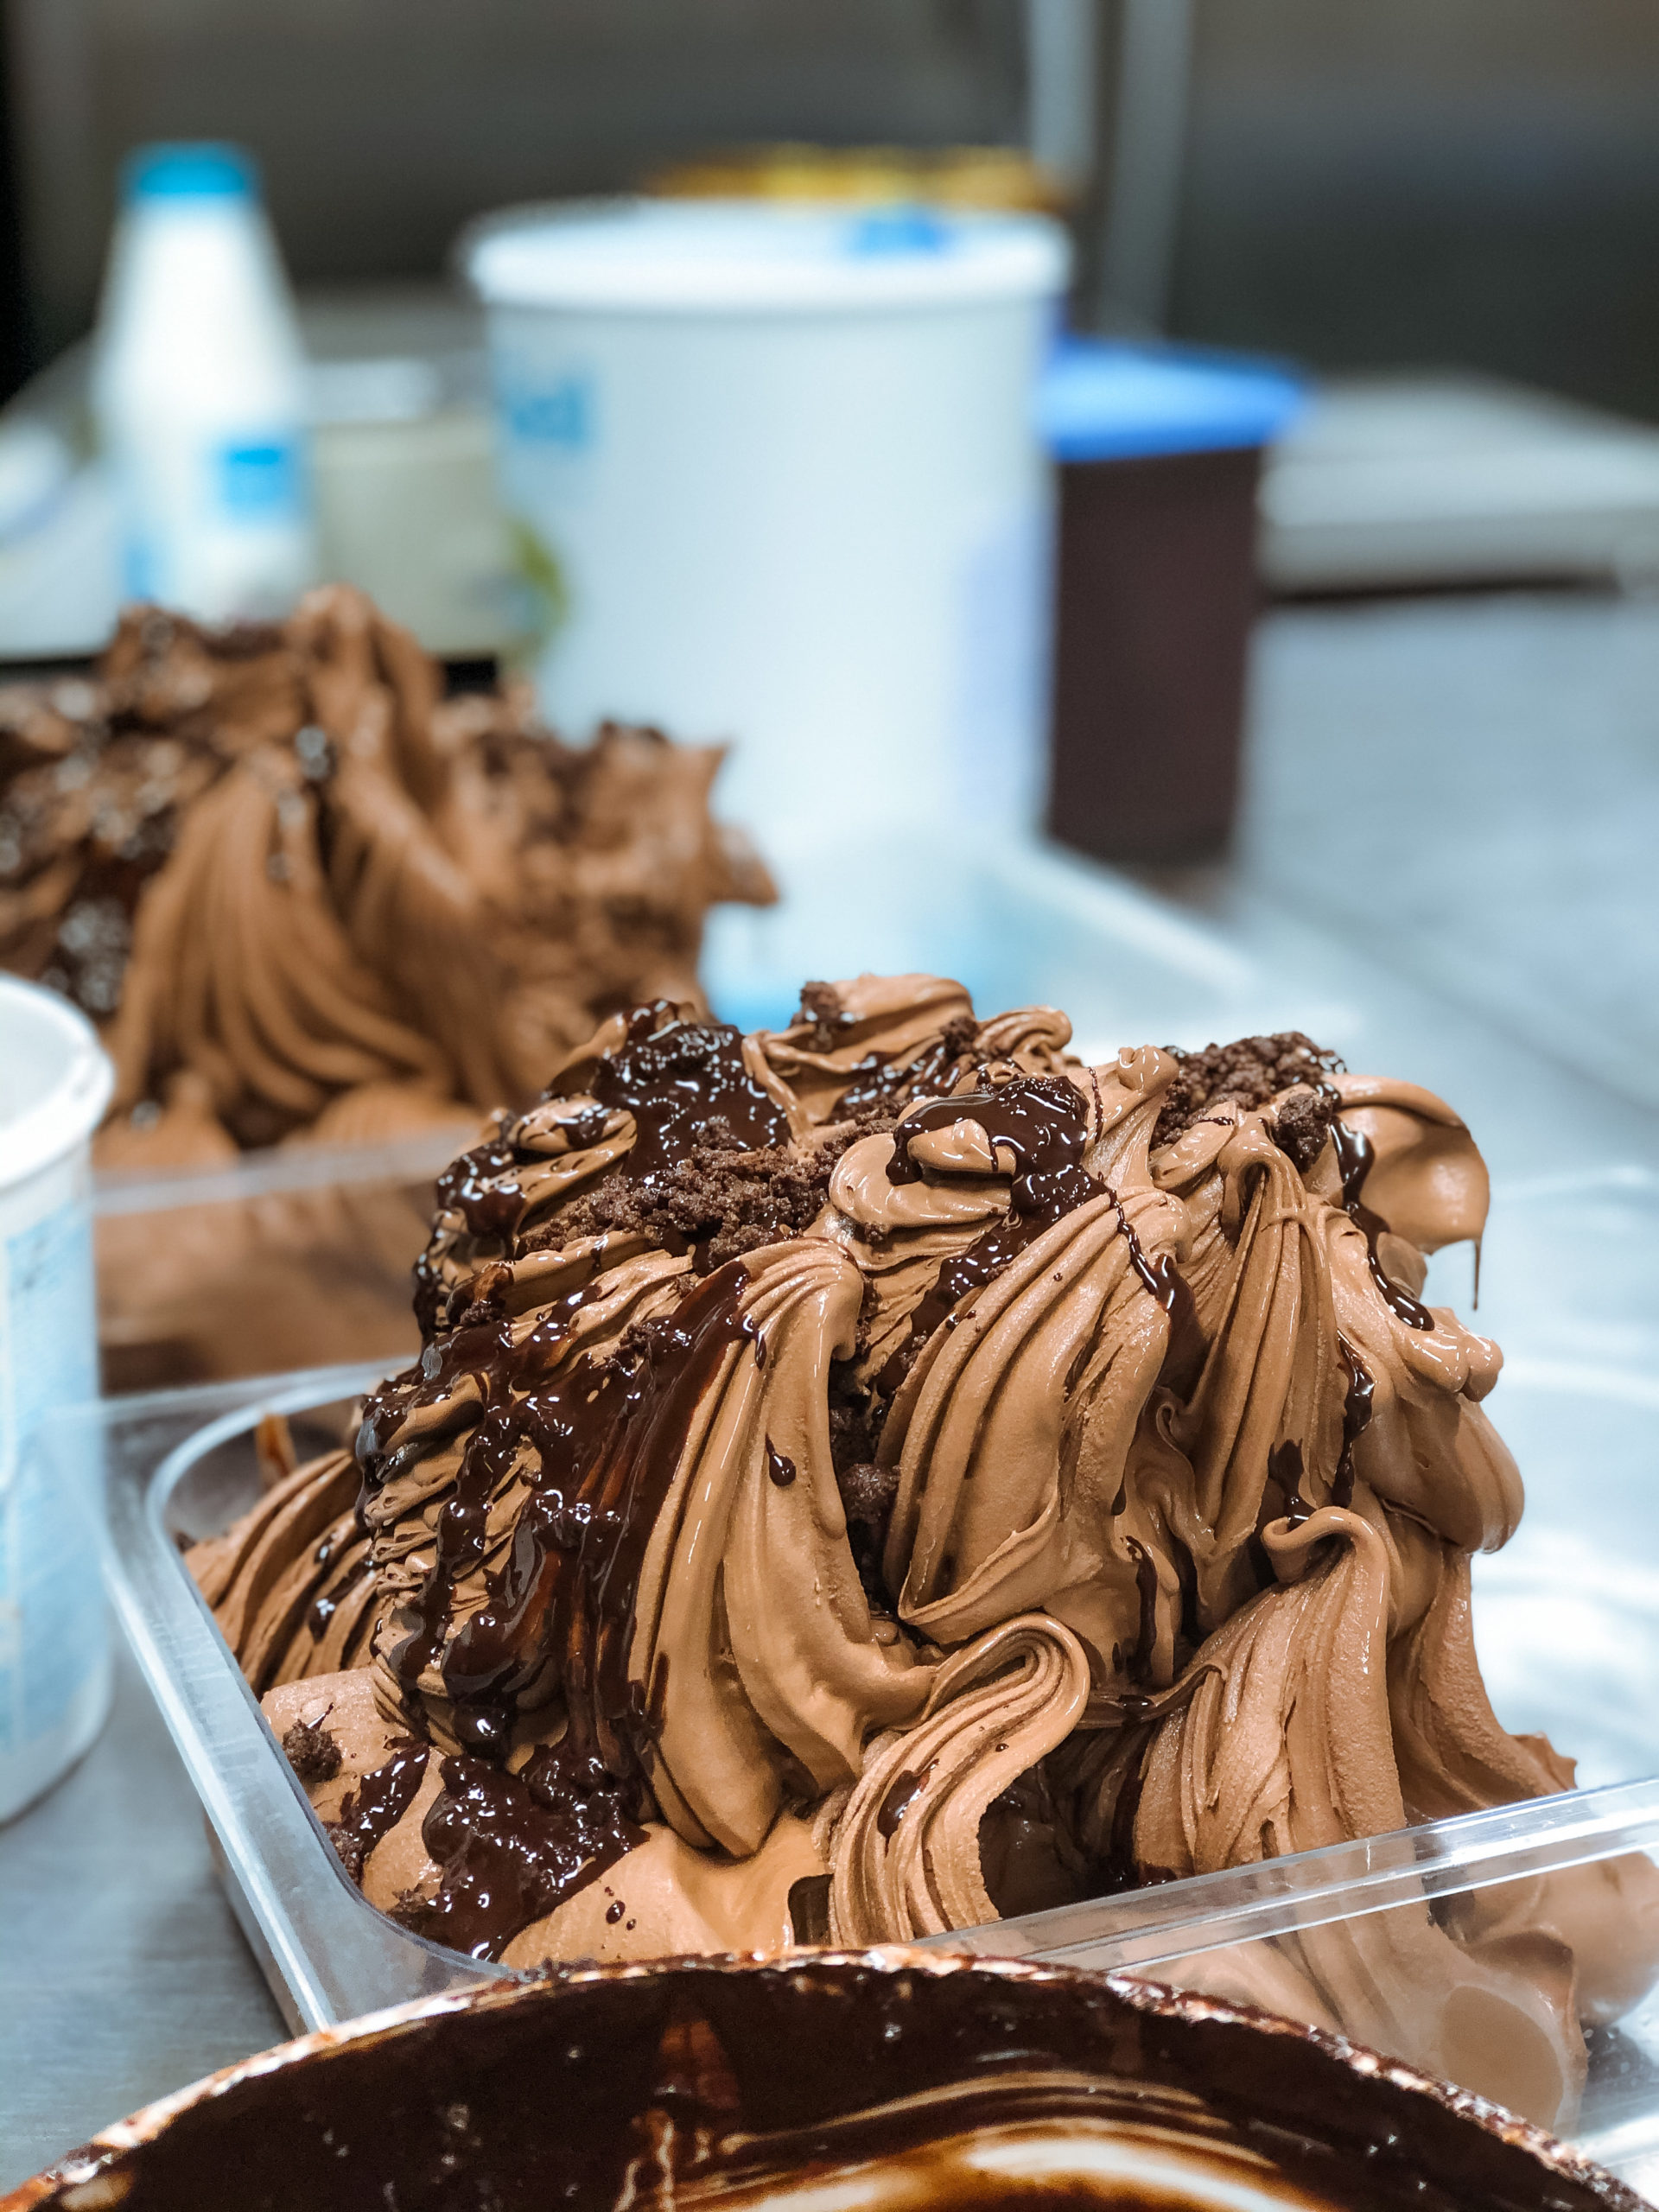 Our Gelato is handmade daily